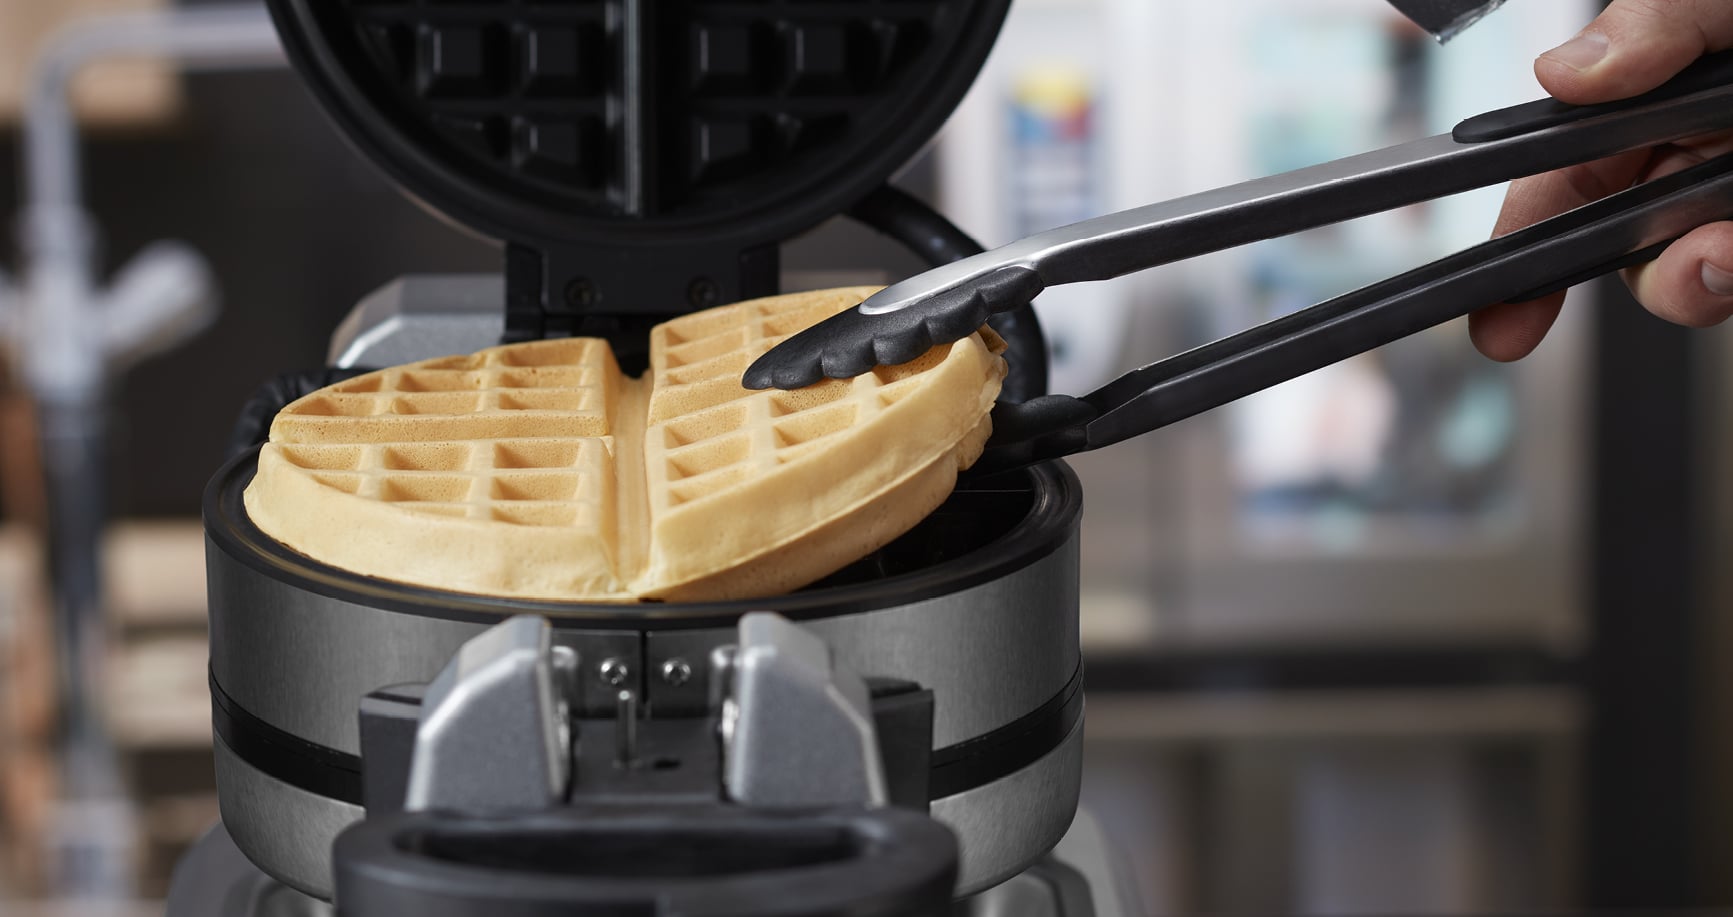 https://www.waringcommercialproducts.com/files/categories/banner_wafflemakers.jpg